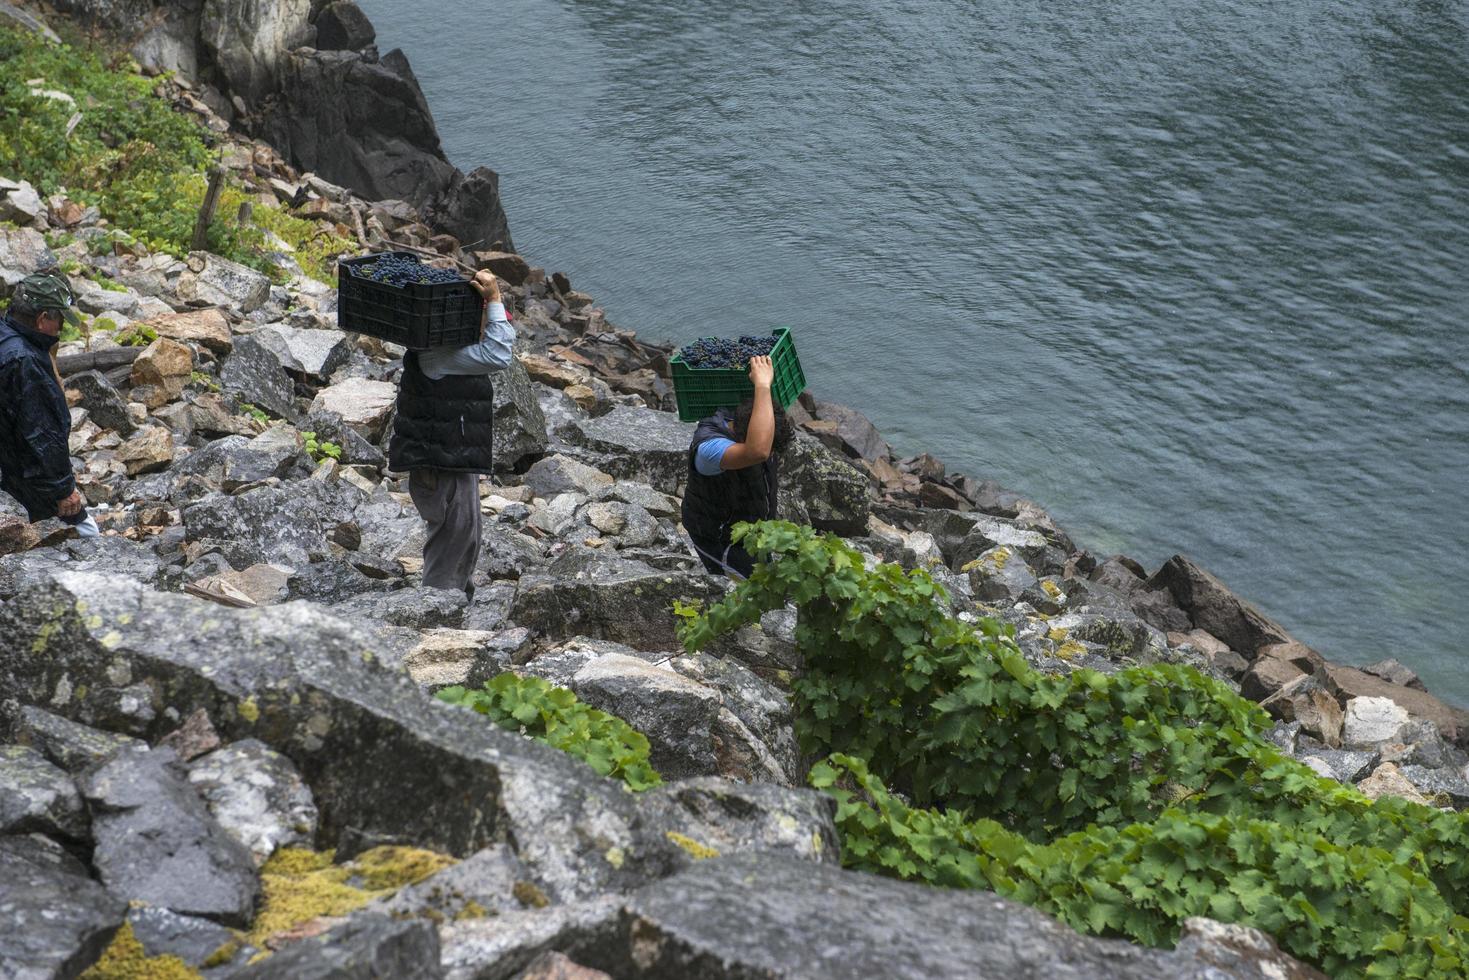 Lugo,Galicia, Spain,2021- Men carrying boxes of grapes down steep slopes to the motor boat that will transport them. photo